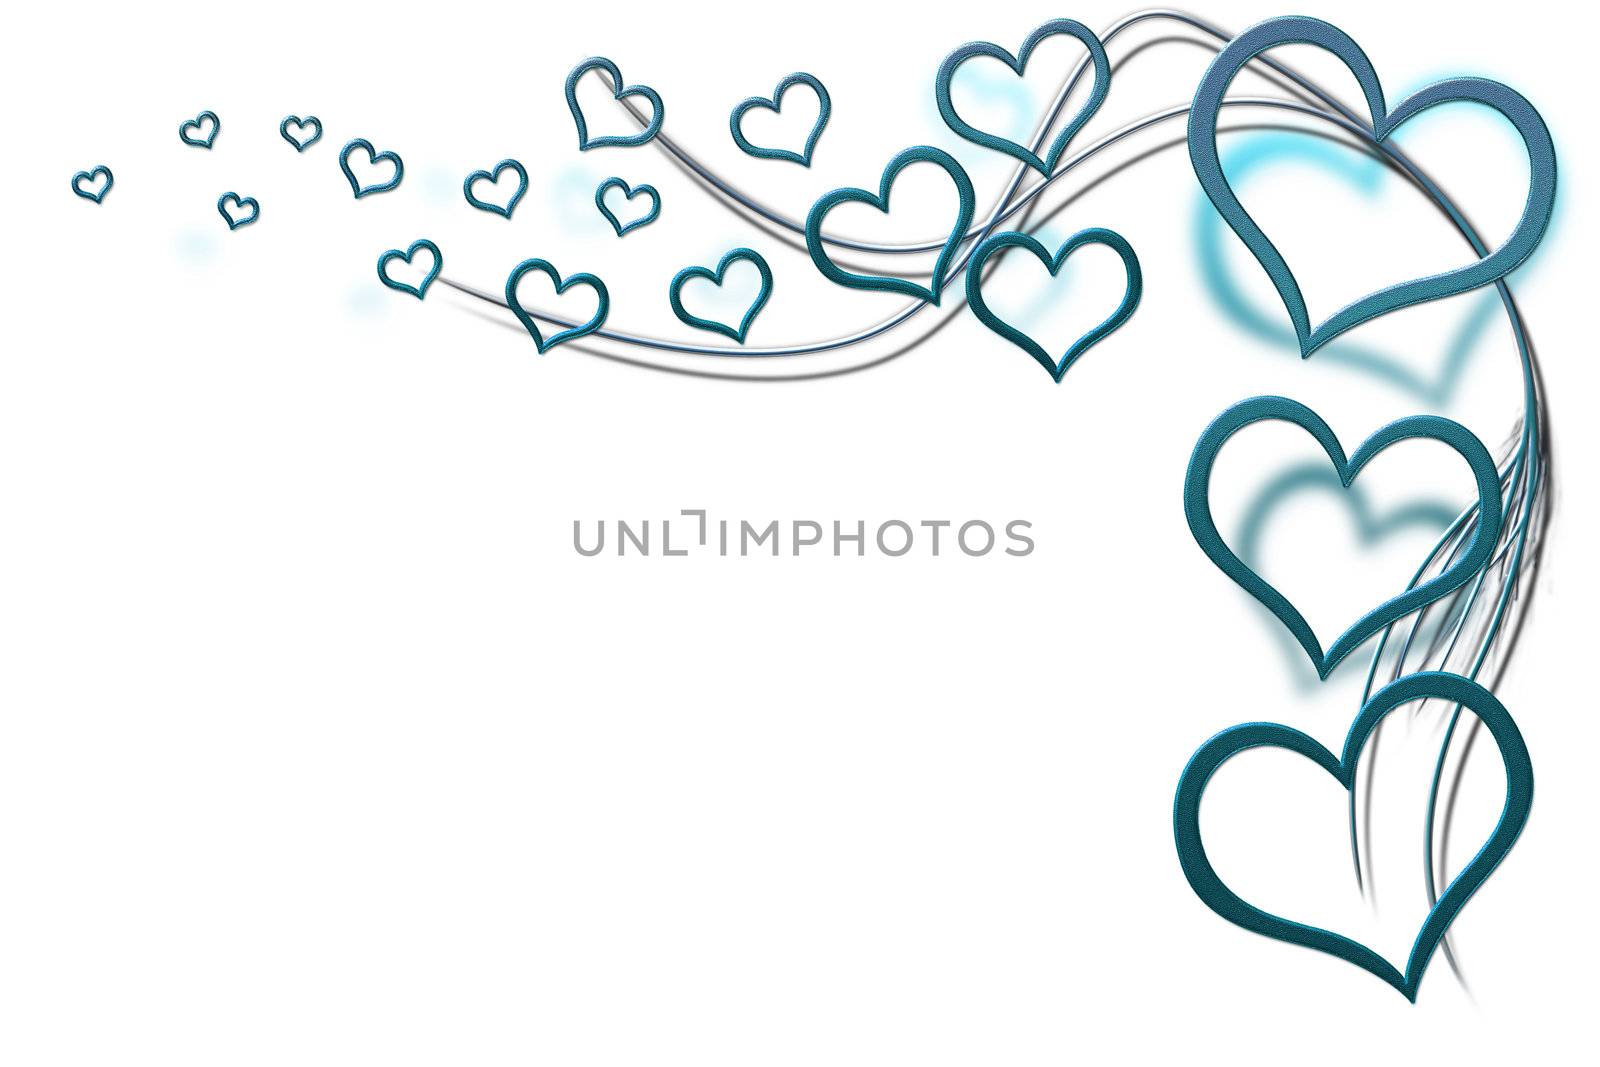 Valentines day background for your designs with turquoise hearts and swirls